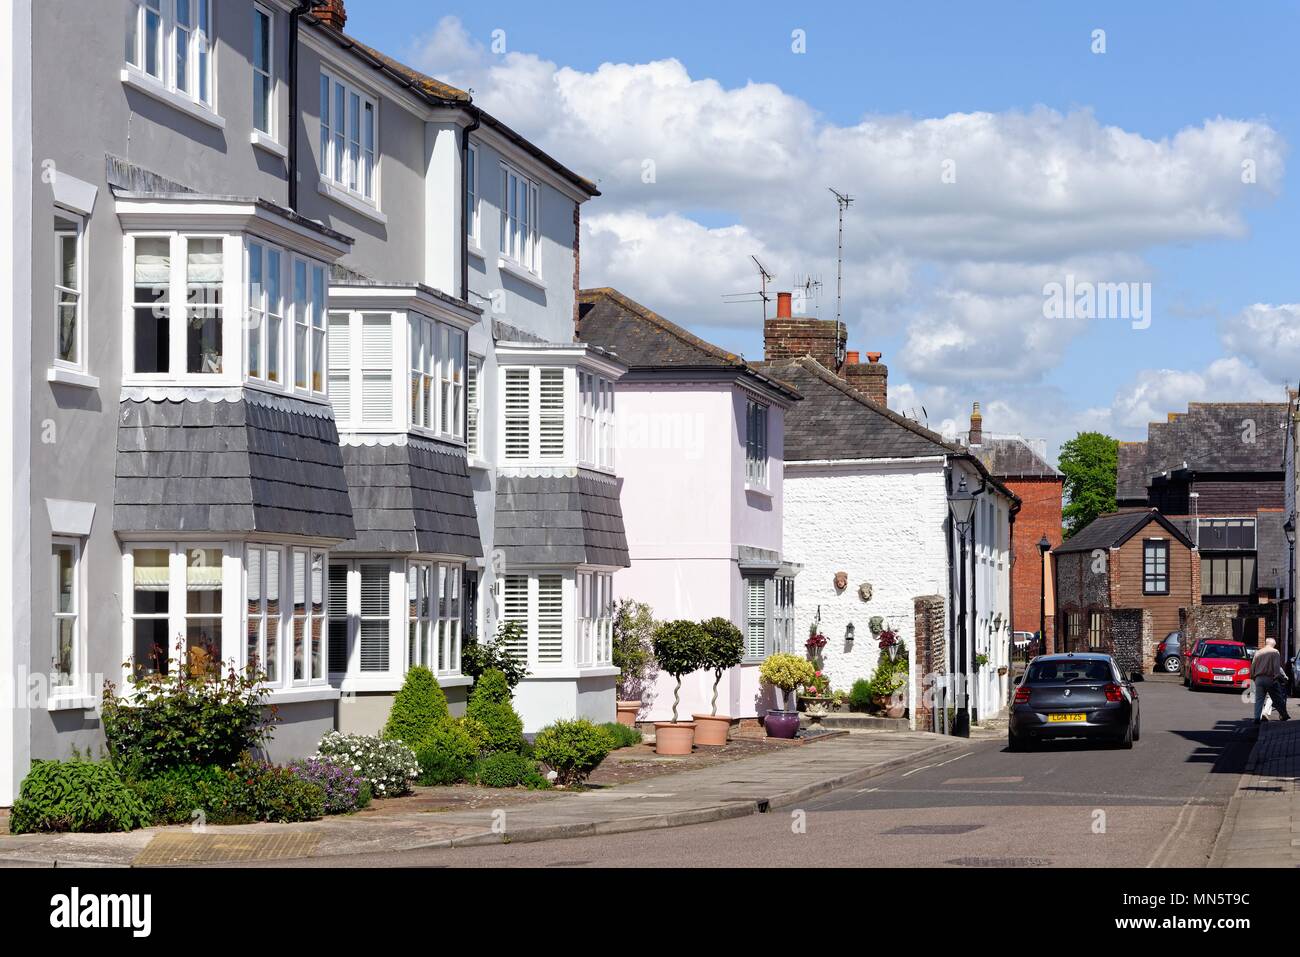 Old historic houses in the town centre of Arundel West Sussex England UK Stock Photo